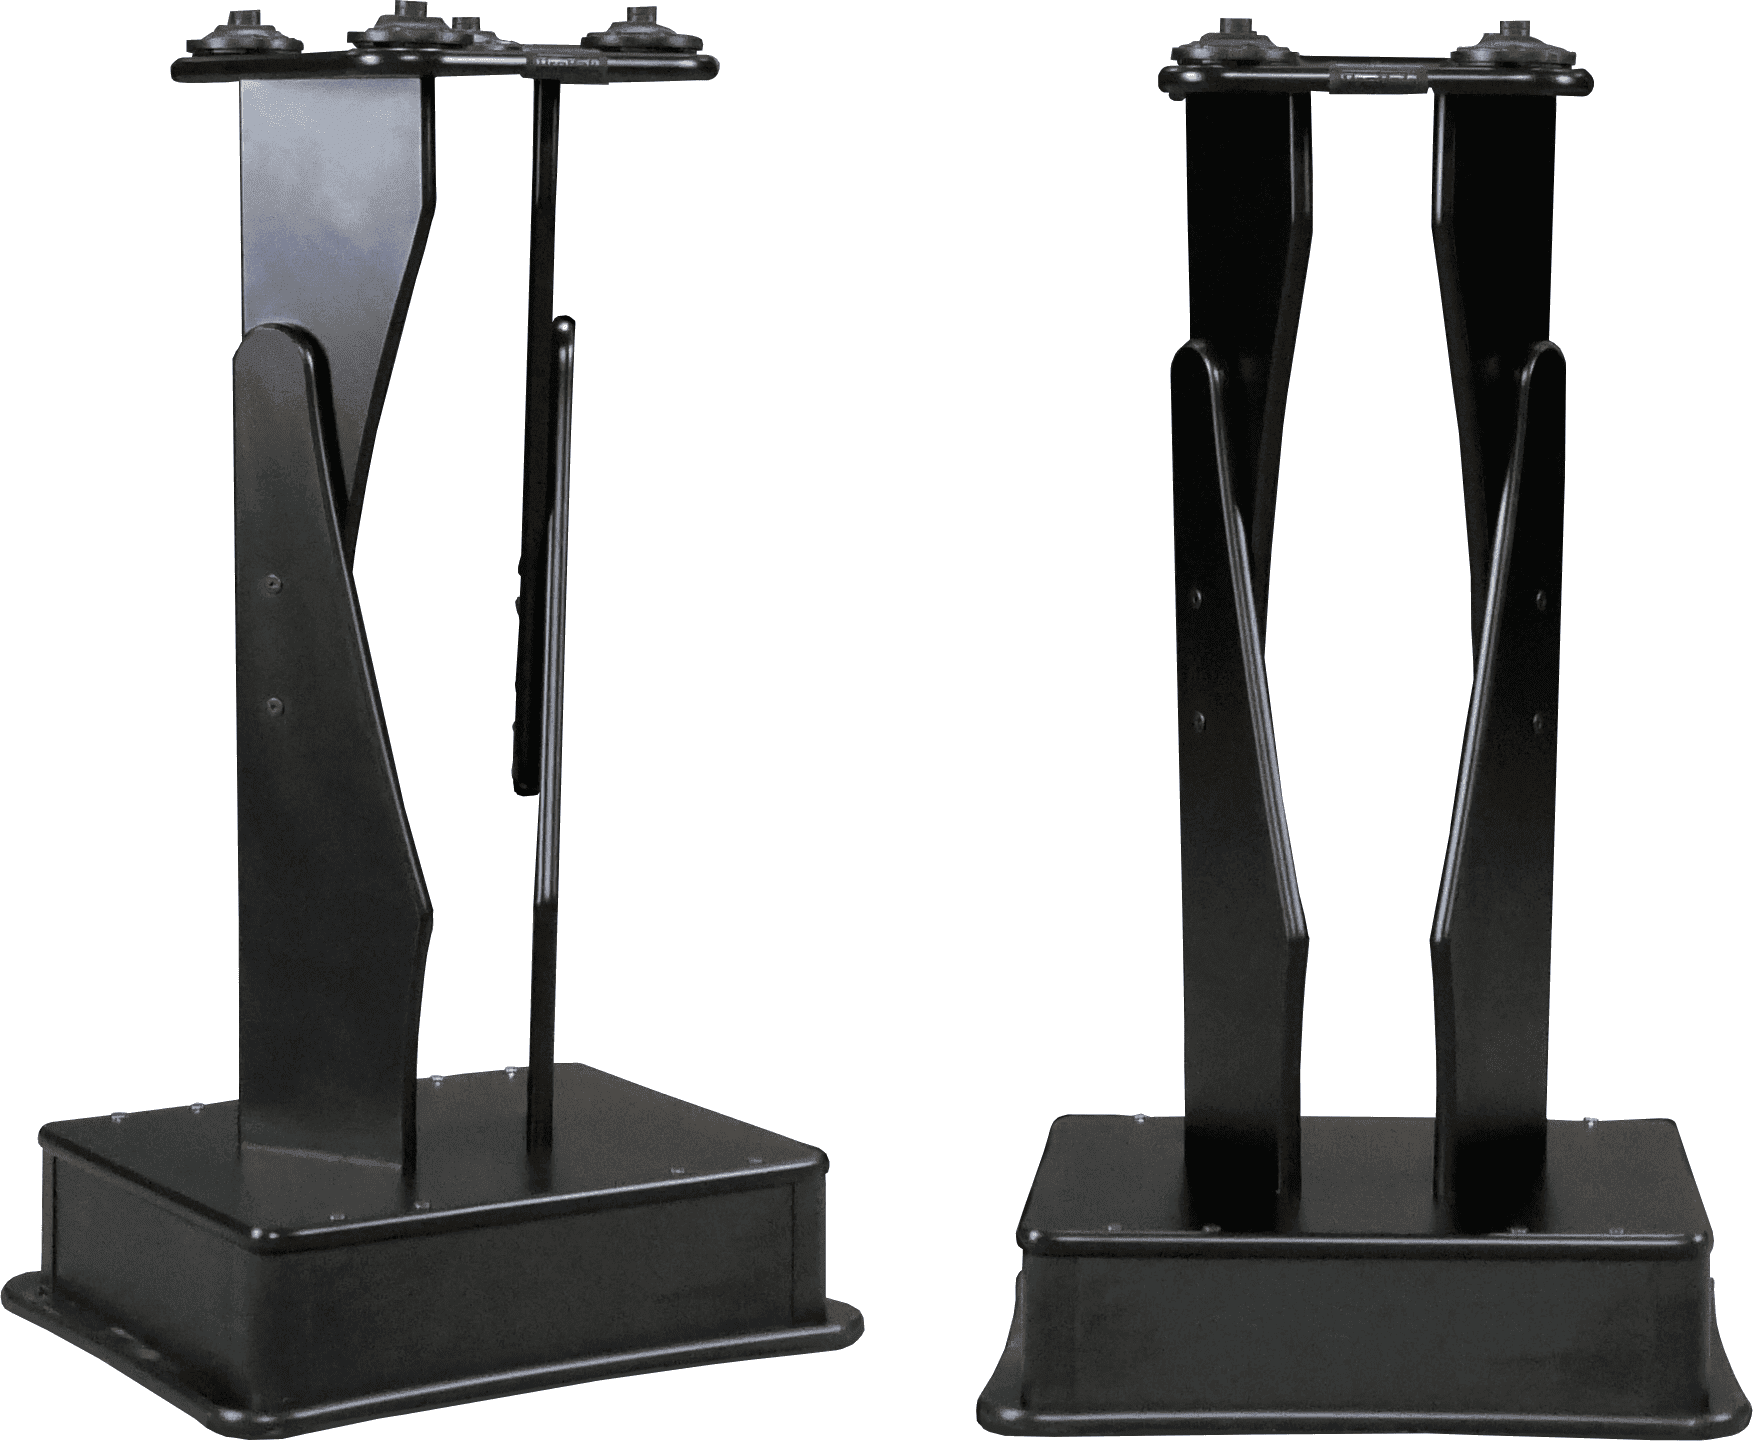 RAB Audio ProRak SDM 50x Monitor Stands | Sweetwater